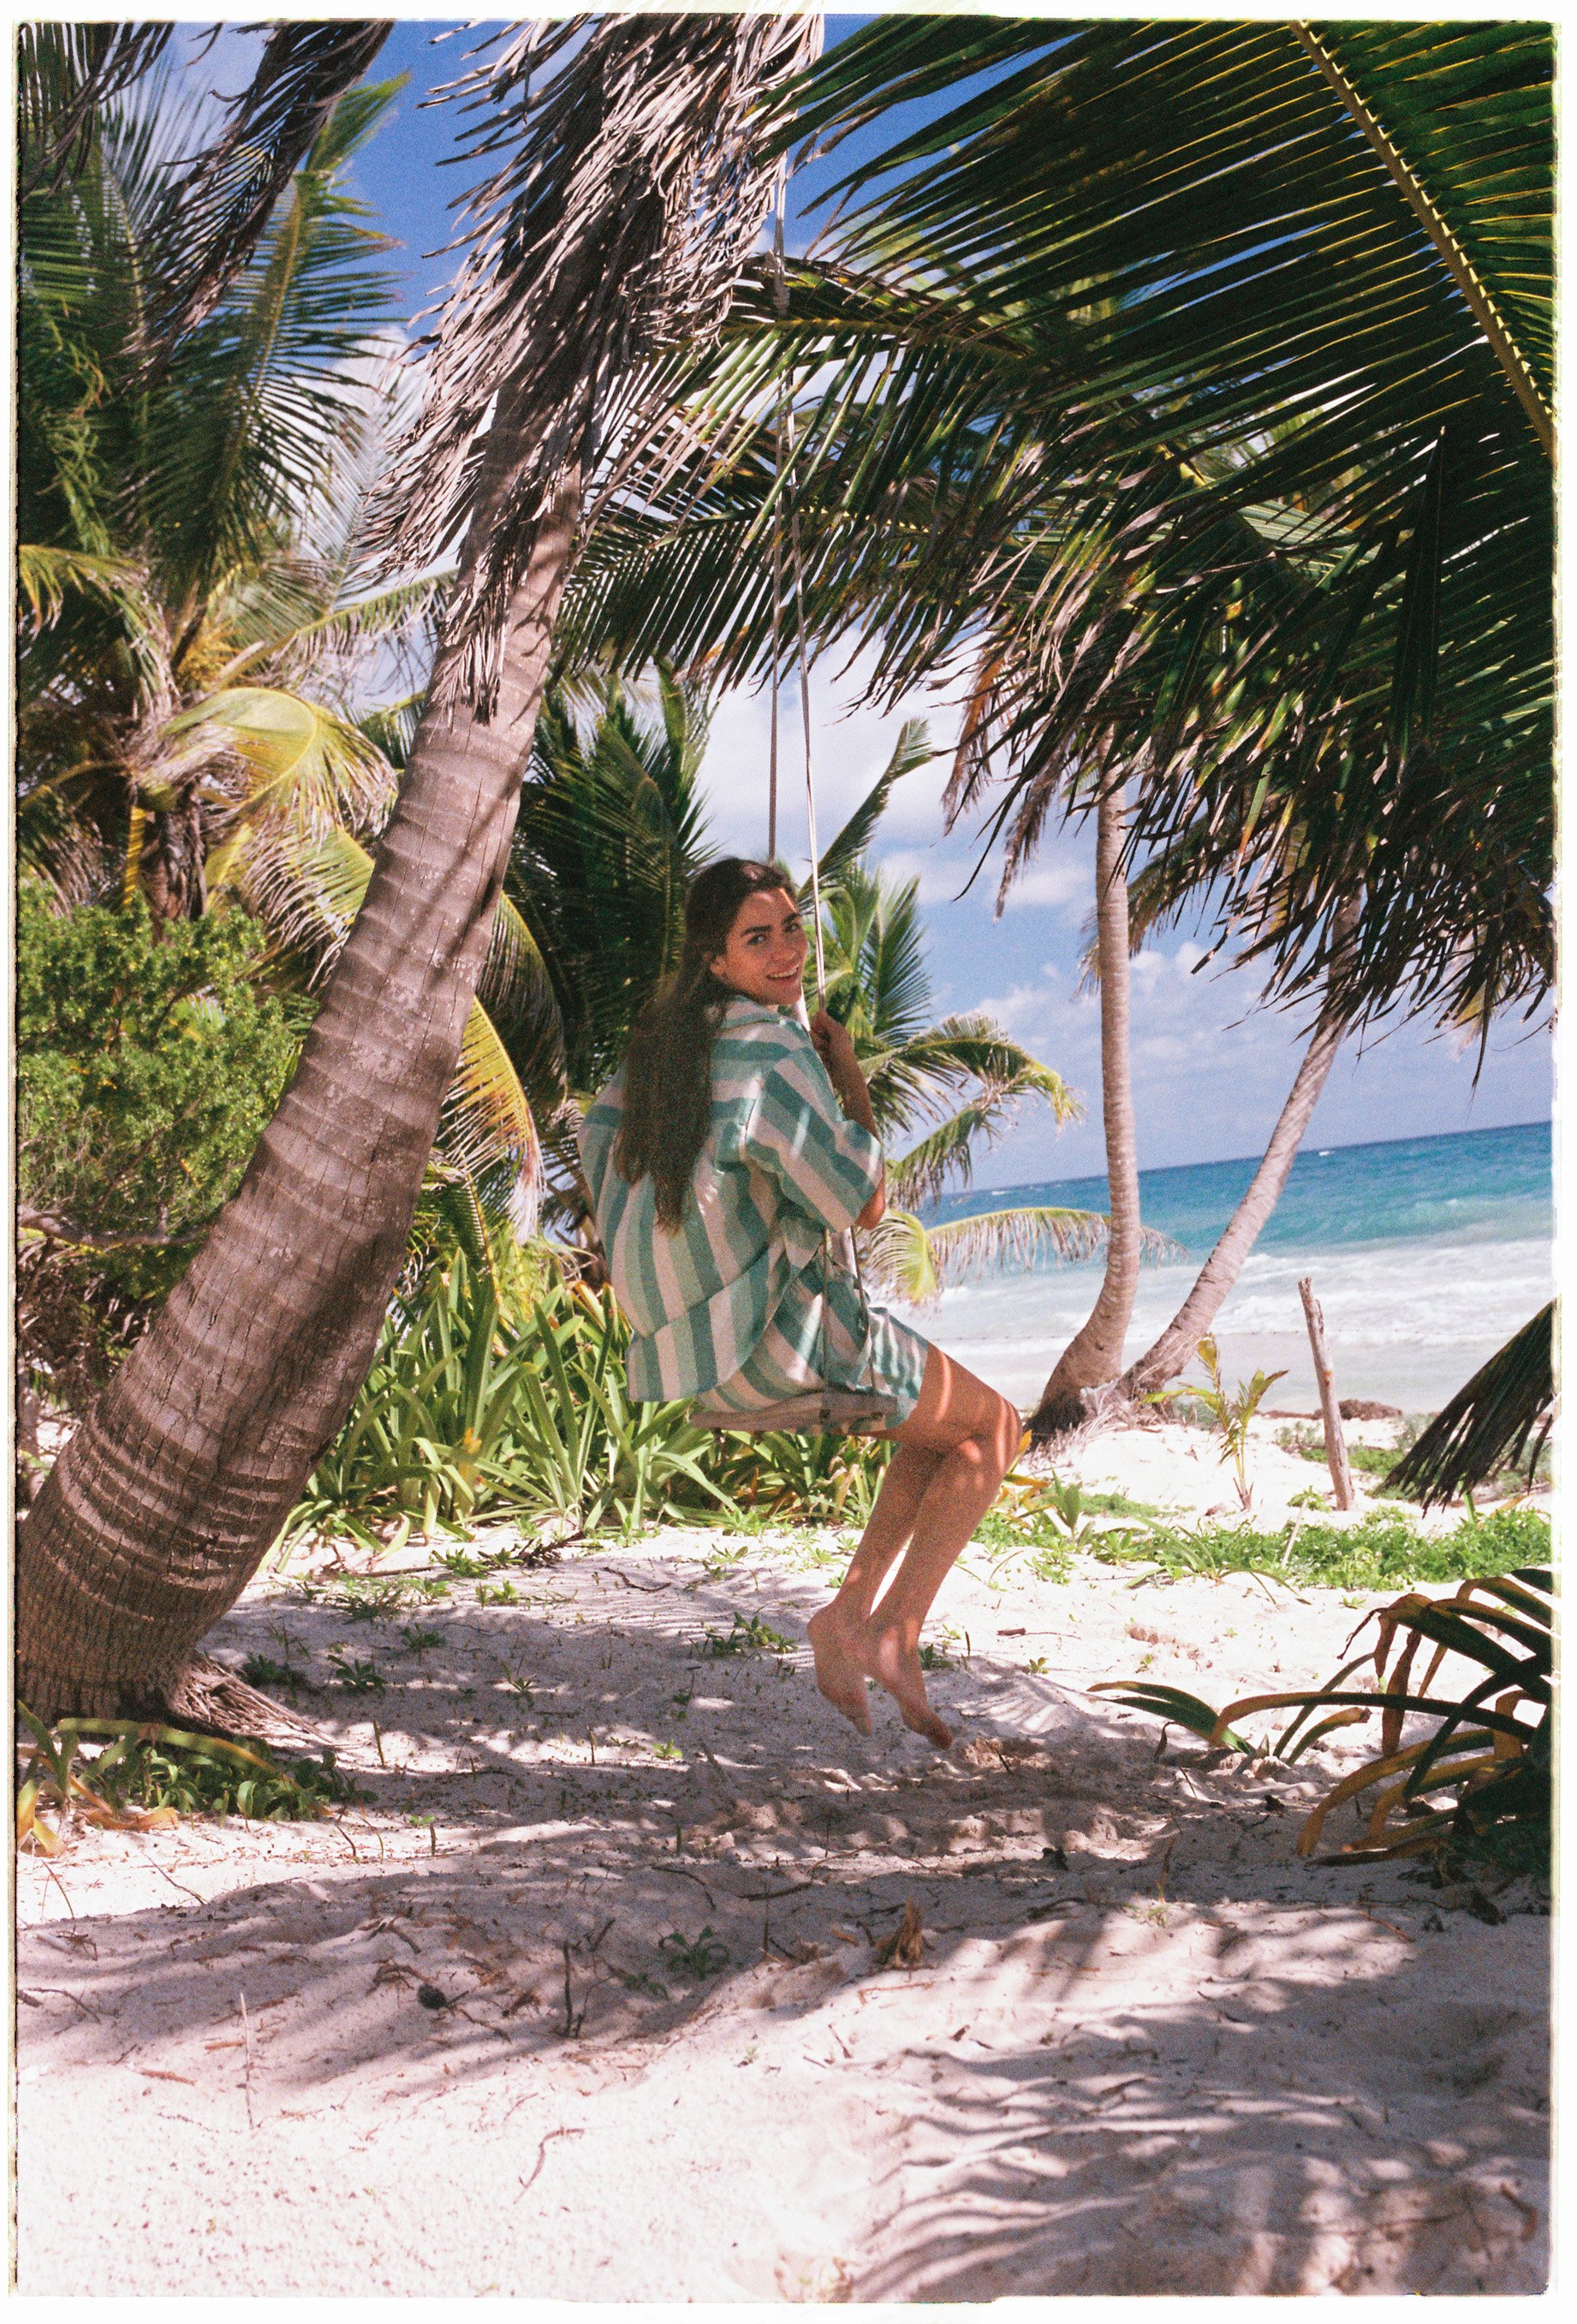  Film photoshoot for Faithfull The Brand captured on untouched beach in Sian Ka’an biosphere reserve in Tulum, Mexico with authentic Mexican cabana. Photographed by Susan Berry on Kodak e100 and Portra 160 35mm film with a Nikon F6 camera 